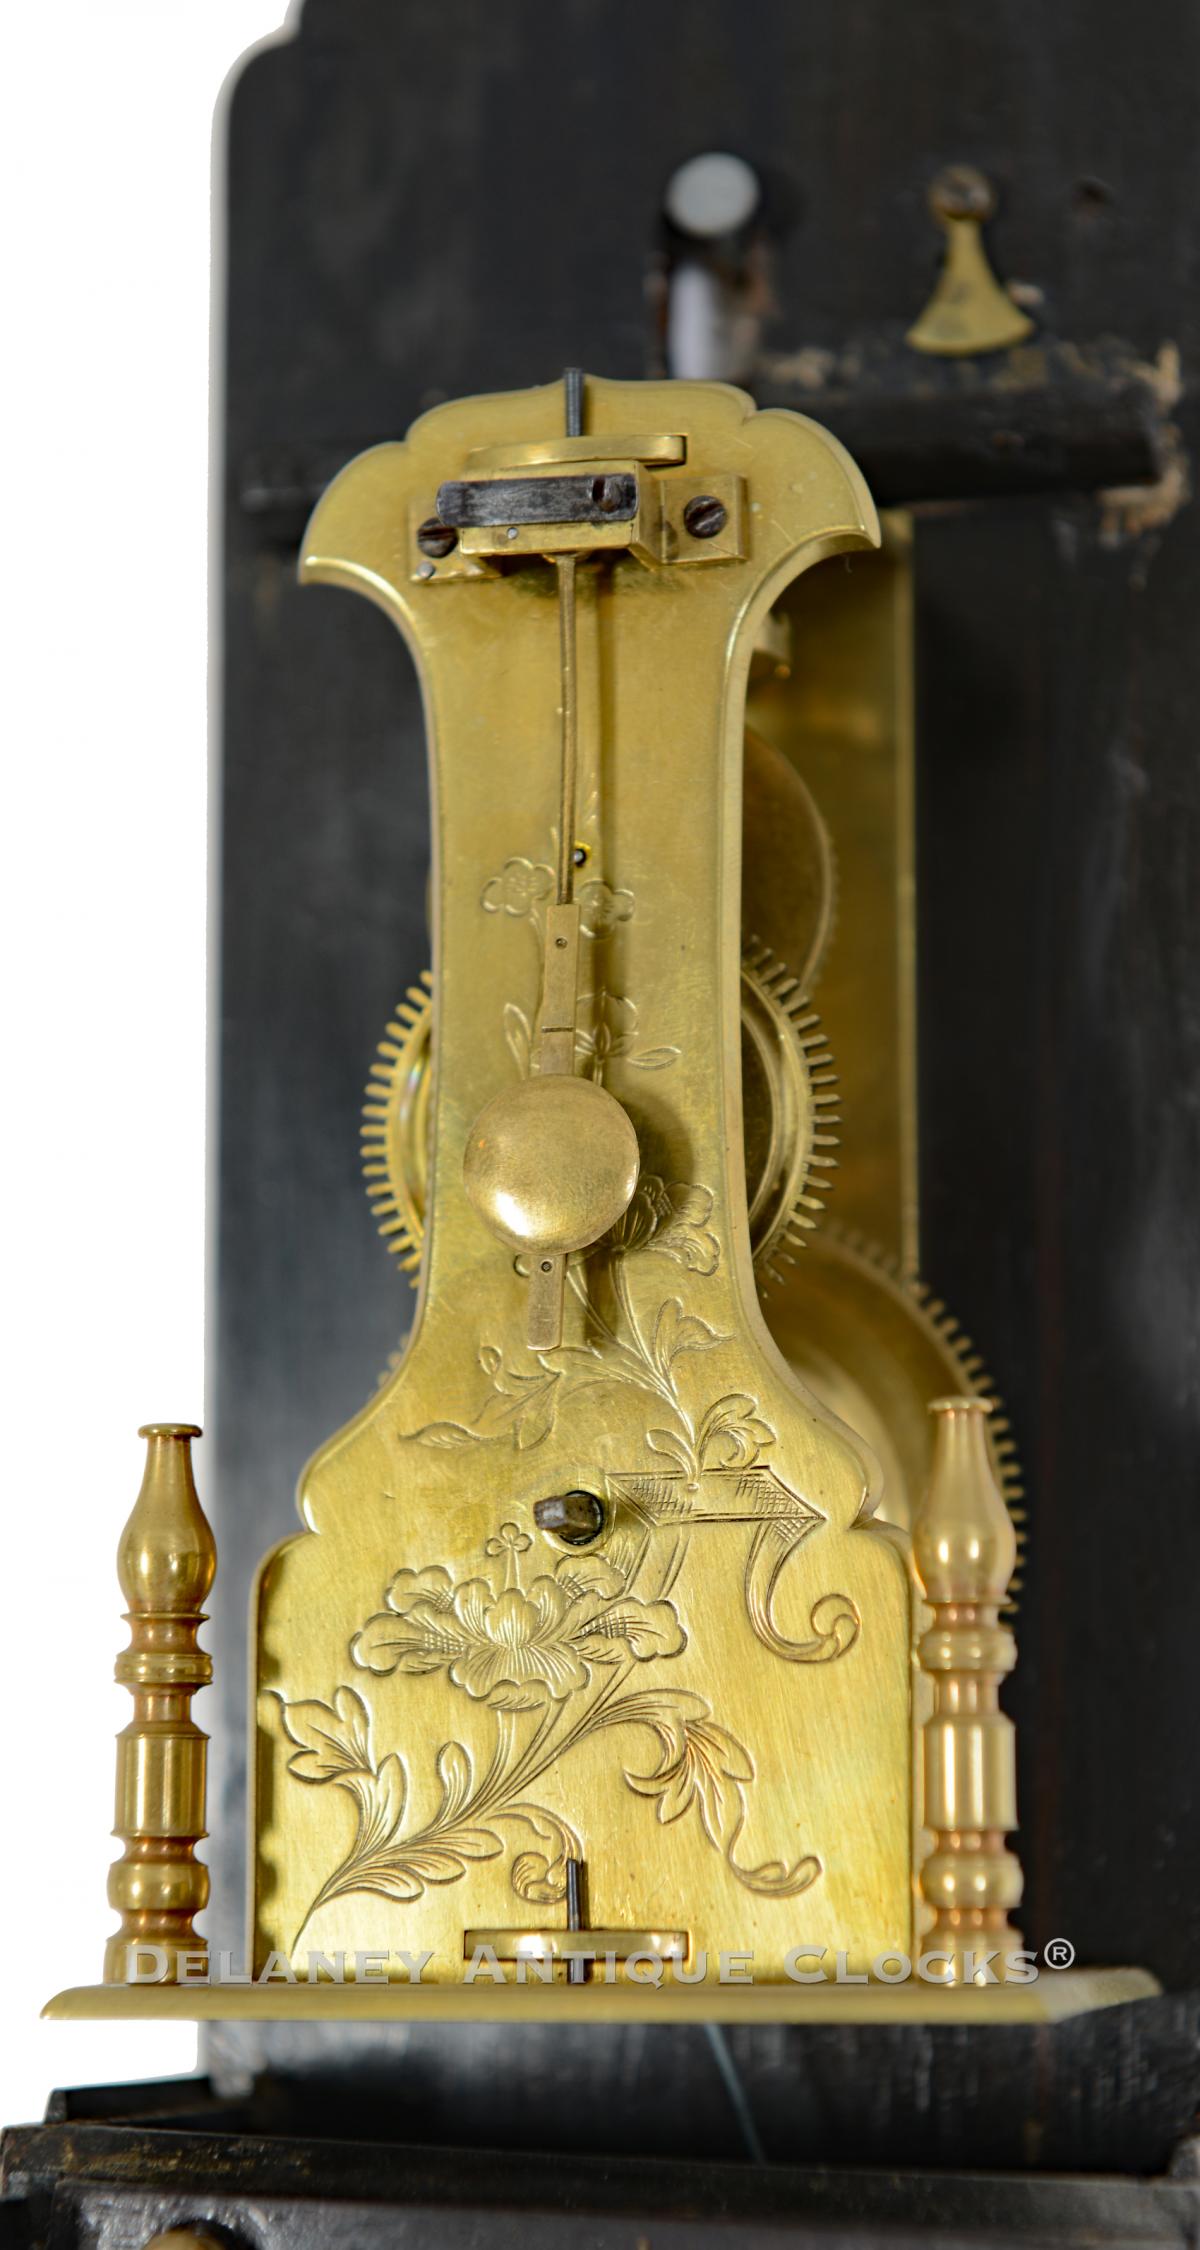 The clock pictured is a Japanese Pillar or Stick clock movement. 223303.